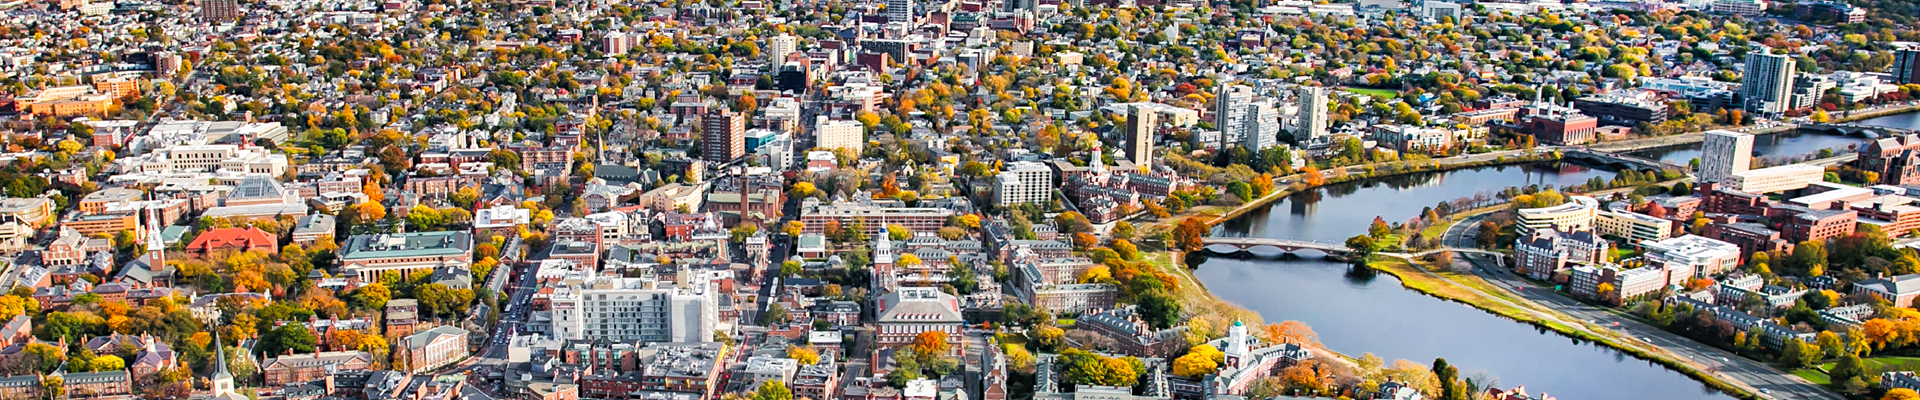 Aerial photo of Cambridge near the Charles River.